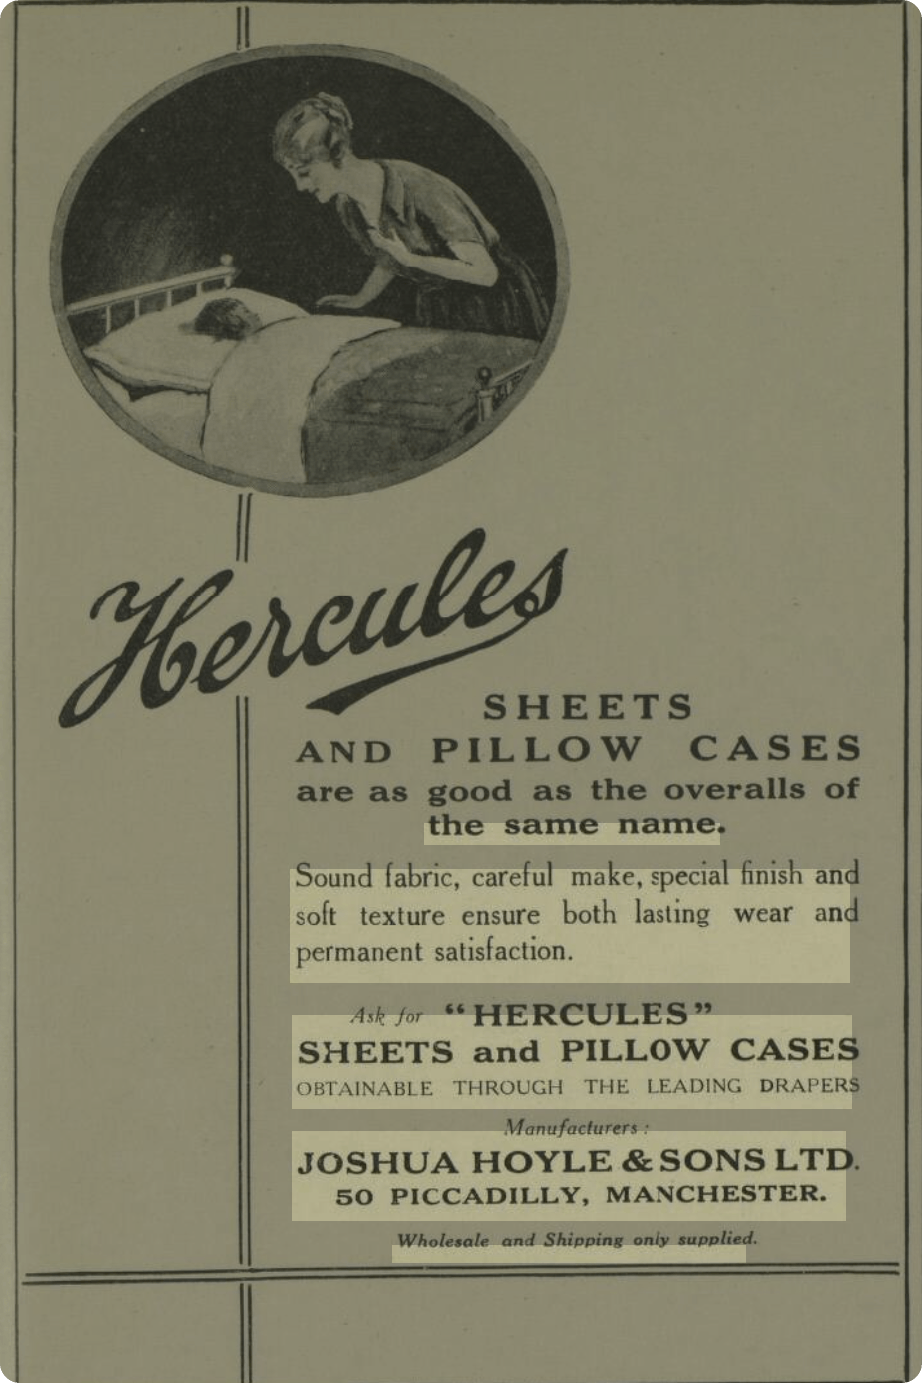 advert for pillowcases from 1925